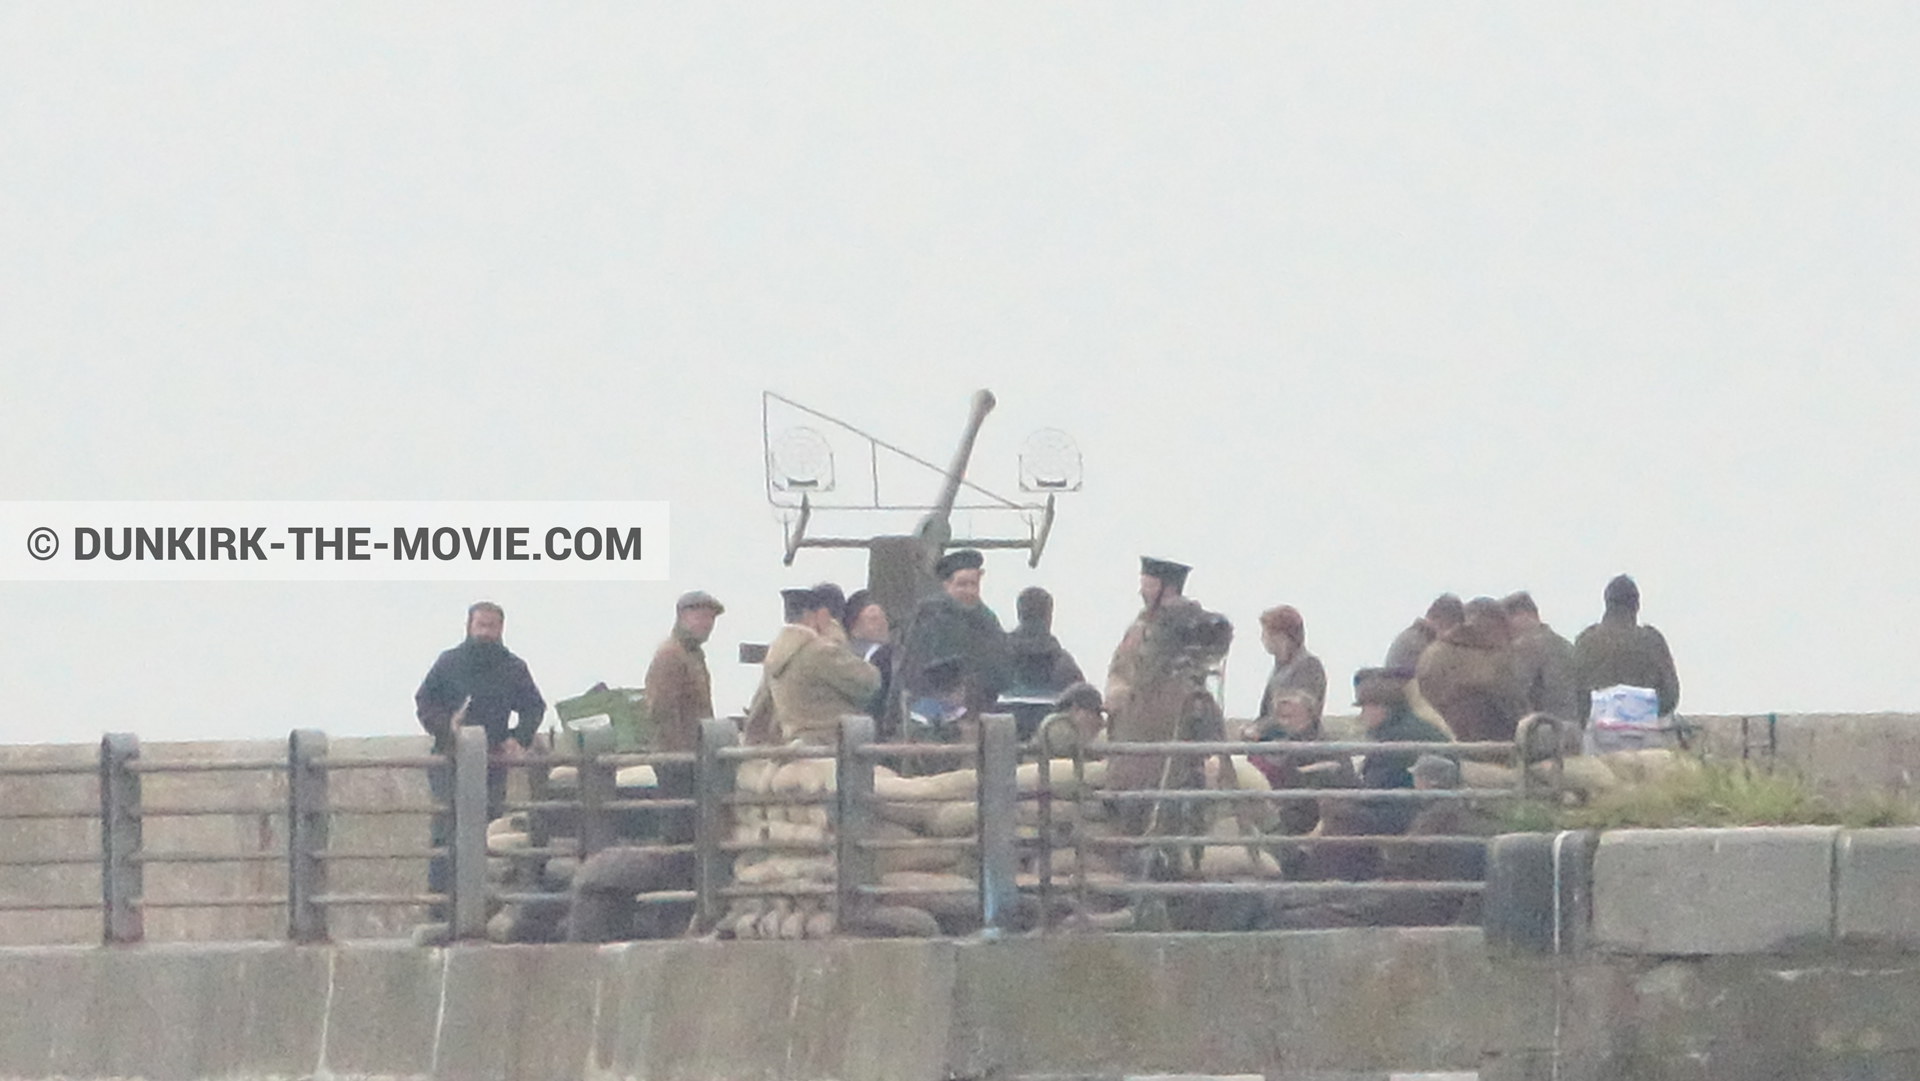 Picture with cannon, grey sky, supernumeraries, EST pier, technical team,  from behind the scene of the Dunkirk movie by Nolan